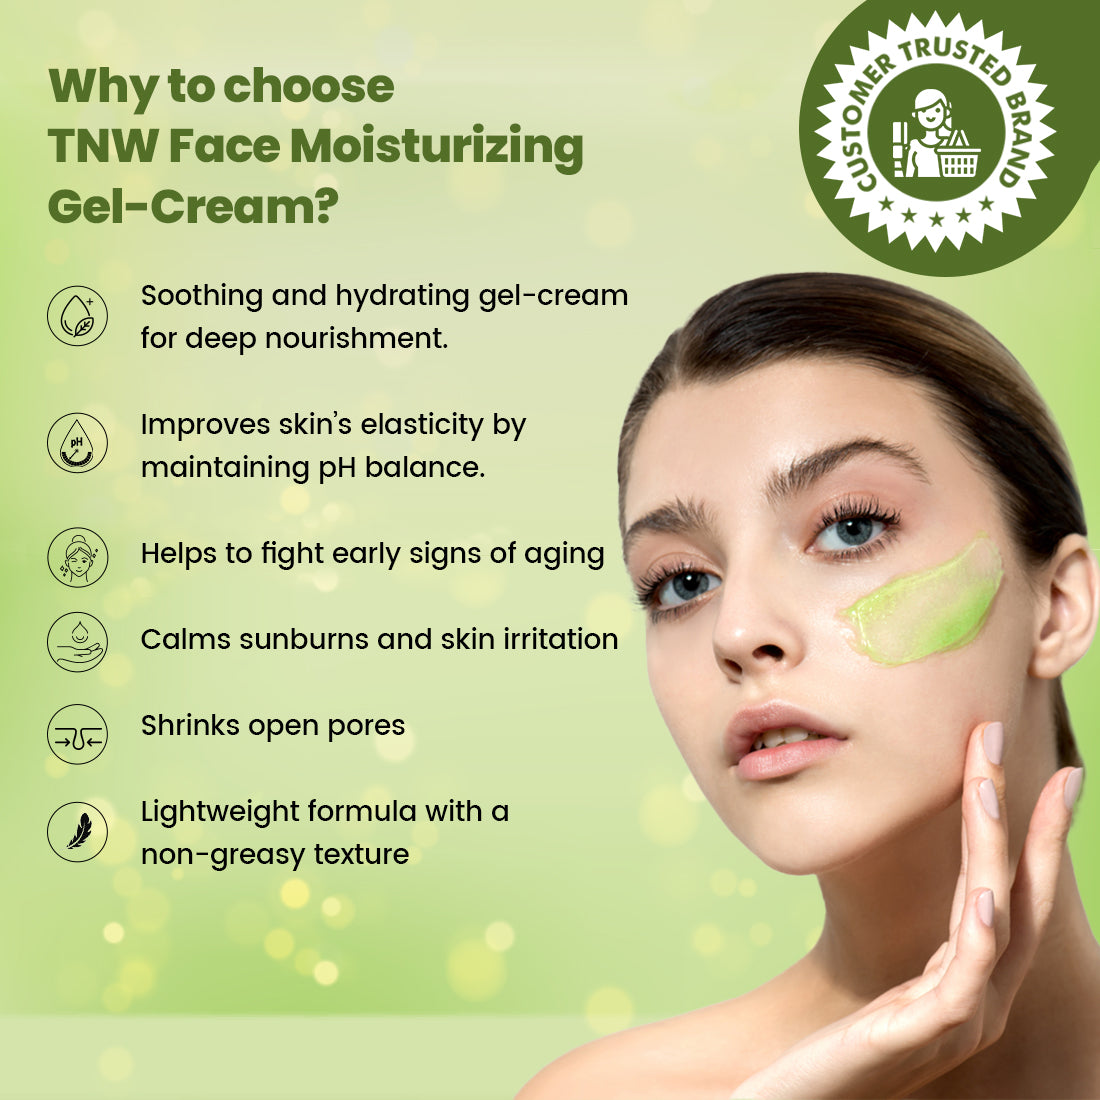 Face Moisturizing Gel Cream (Non-Sticky & Non-Greasy Formula Suitable for All Skin Types)